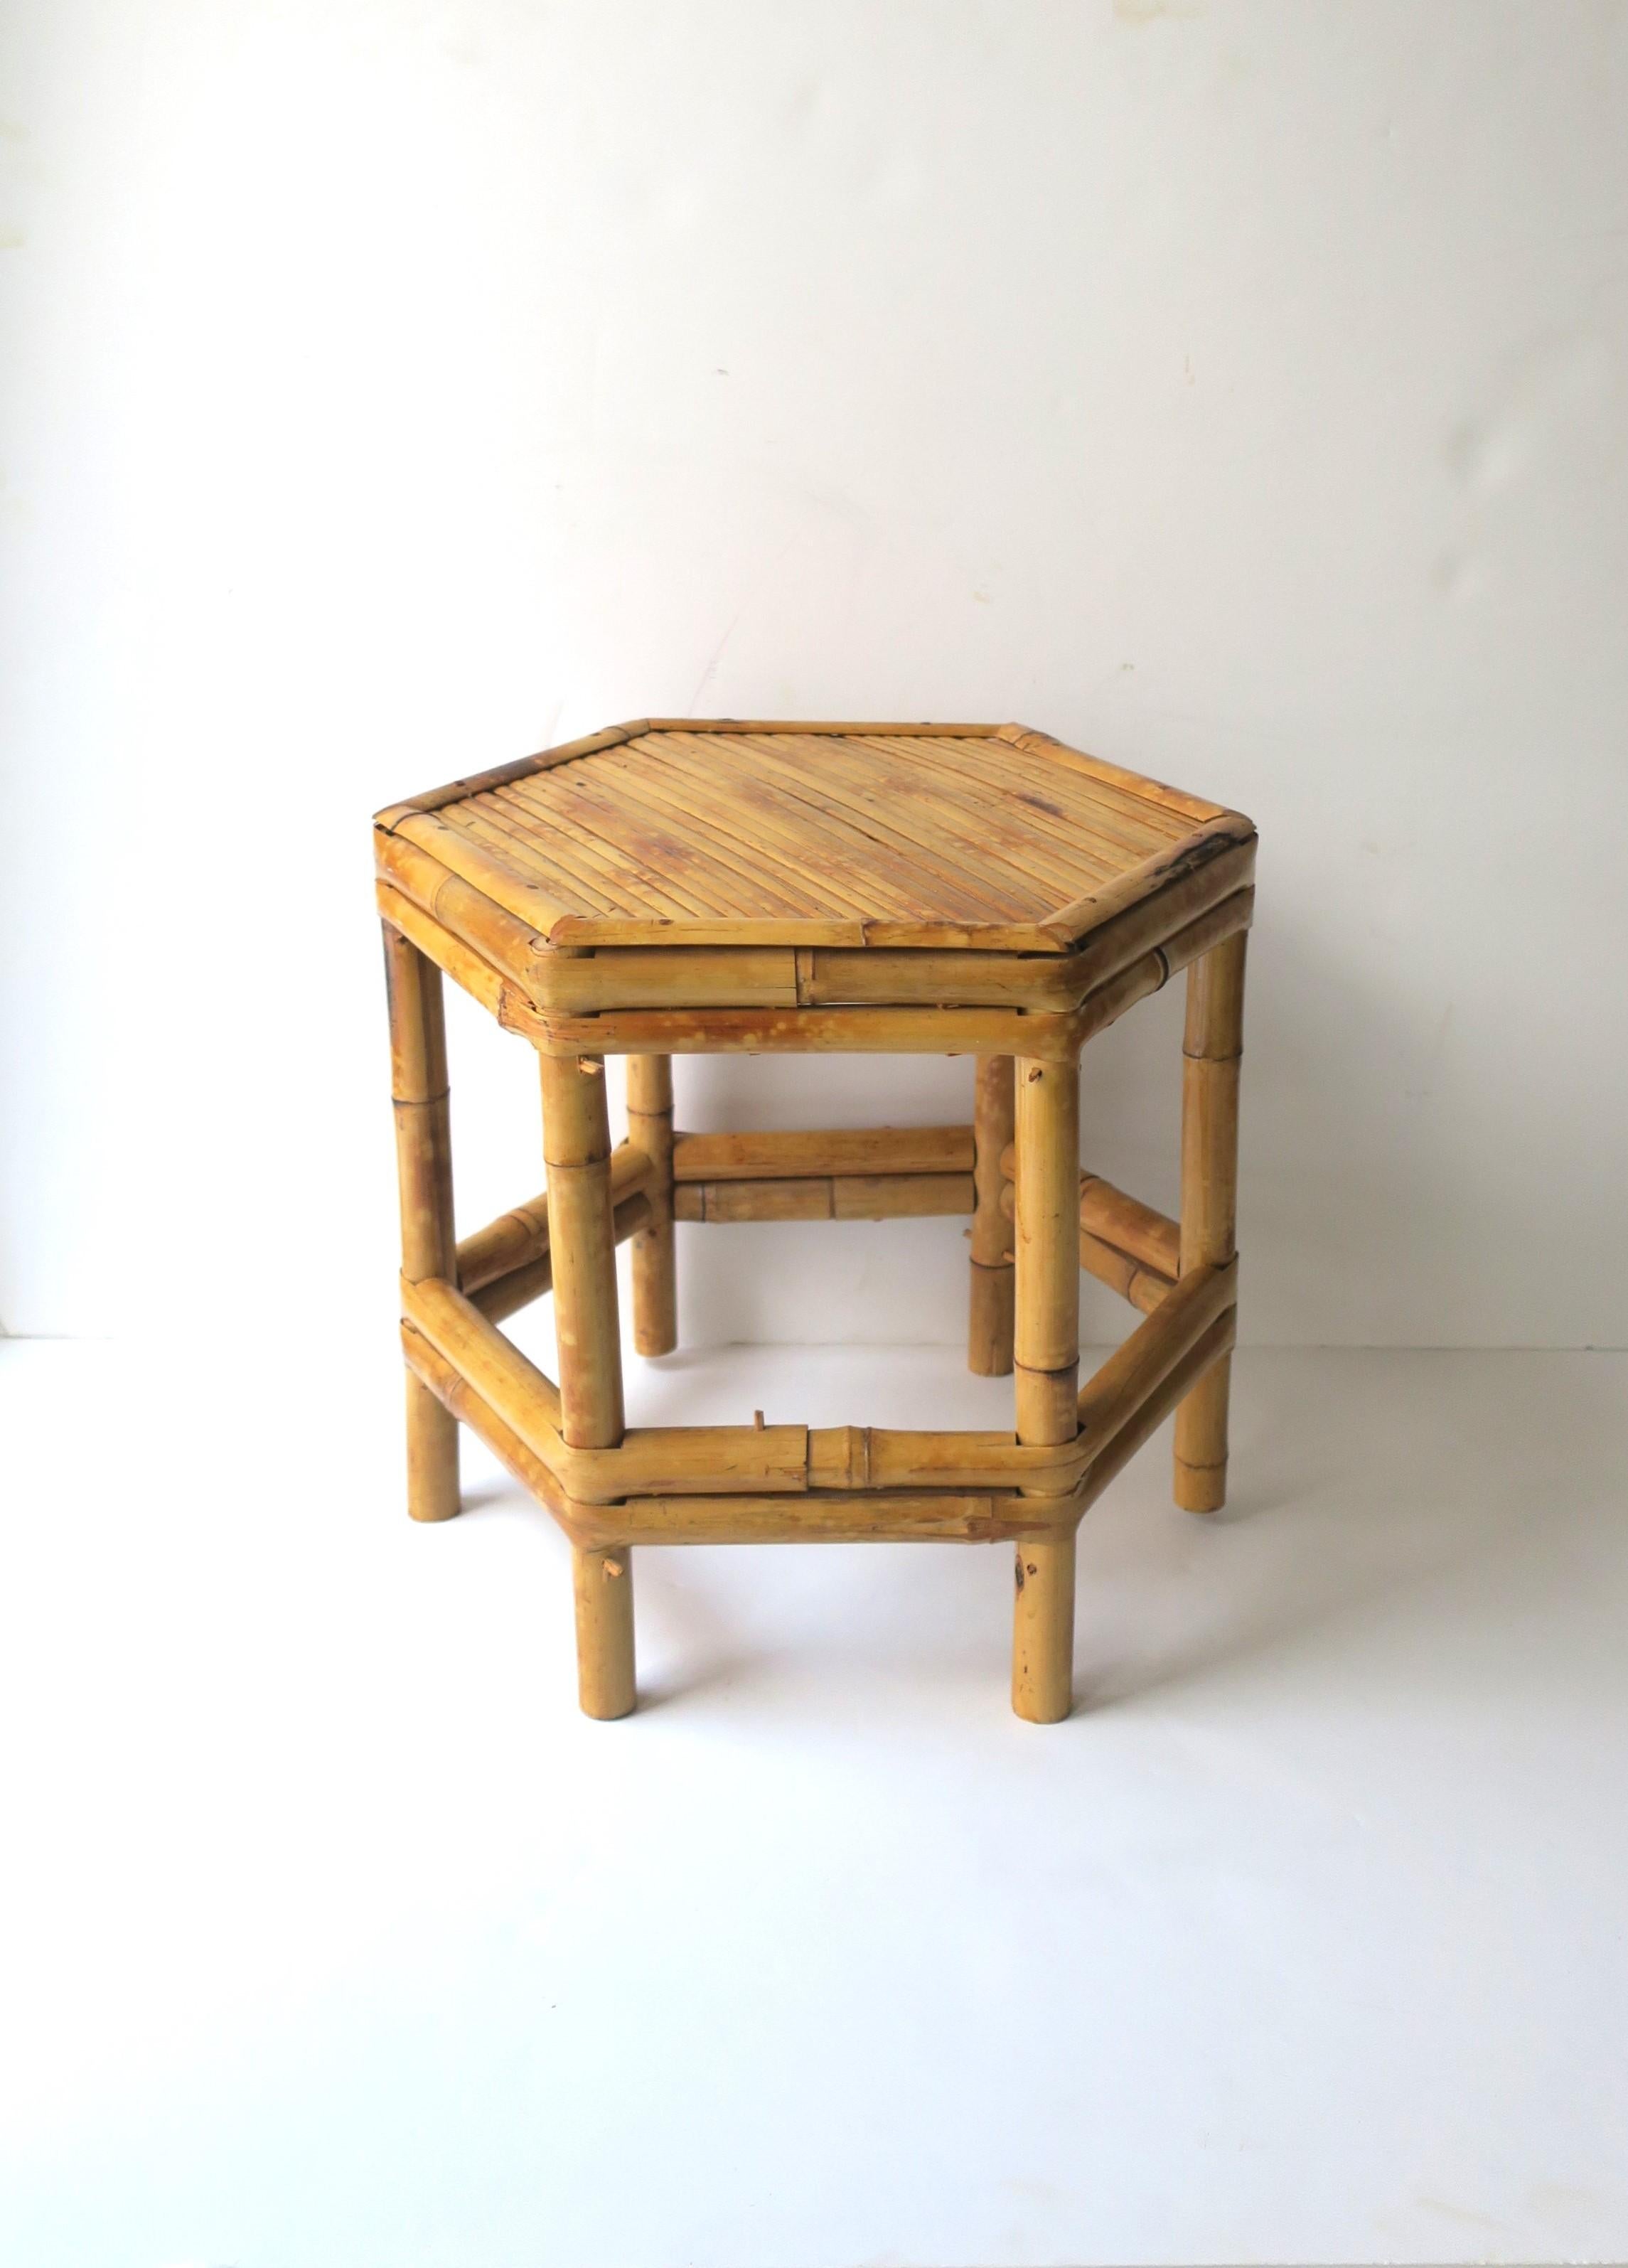 A small, low, wicker bamboo pedestal table or plant stand, etc., circa 1970s, Asia. Piece has a 'hexagon' shape, which is a nice alternative to round or square. A great piece to hold a drink, books, plant, etc. Piece is a convenient